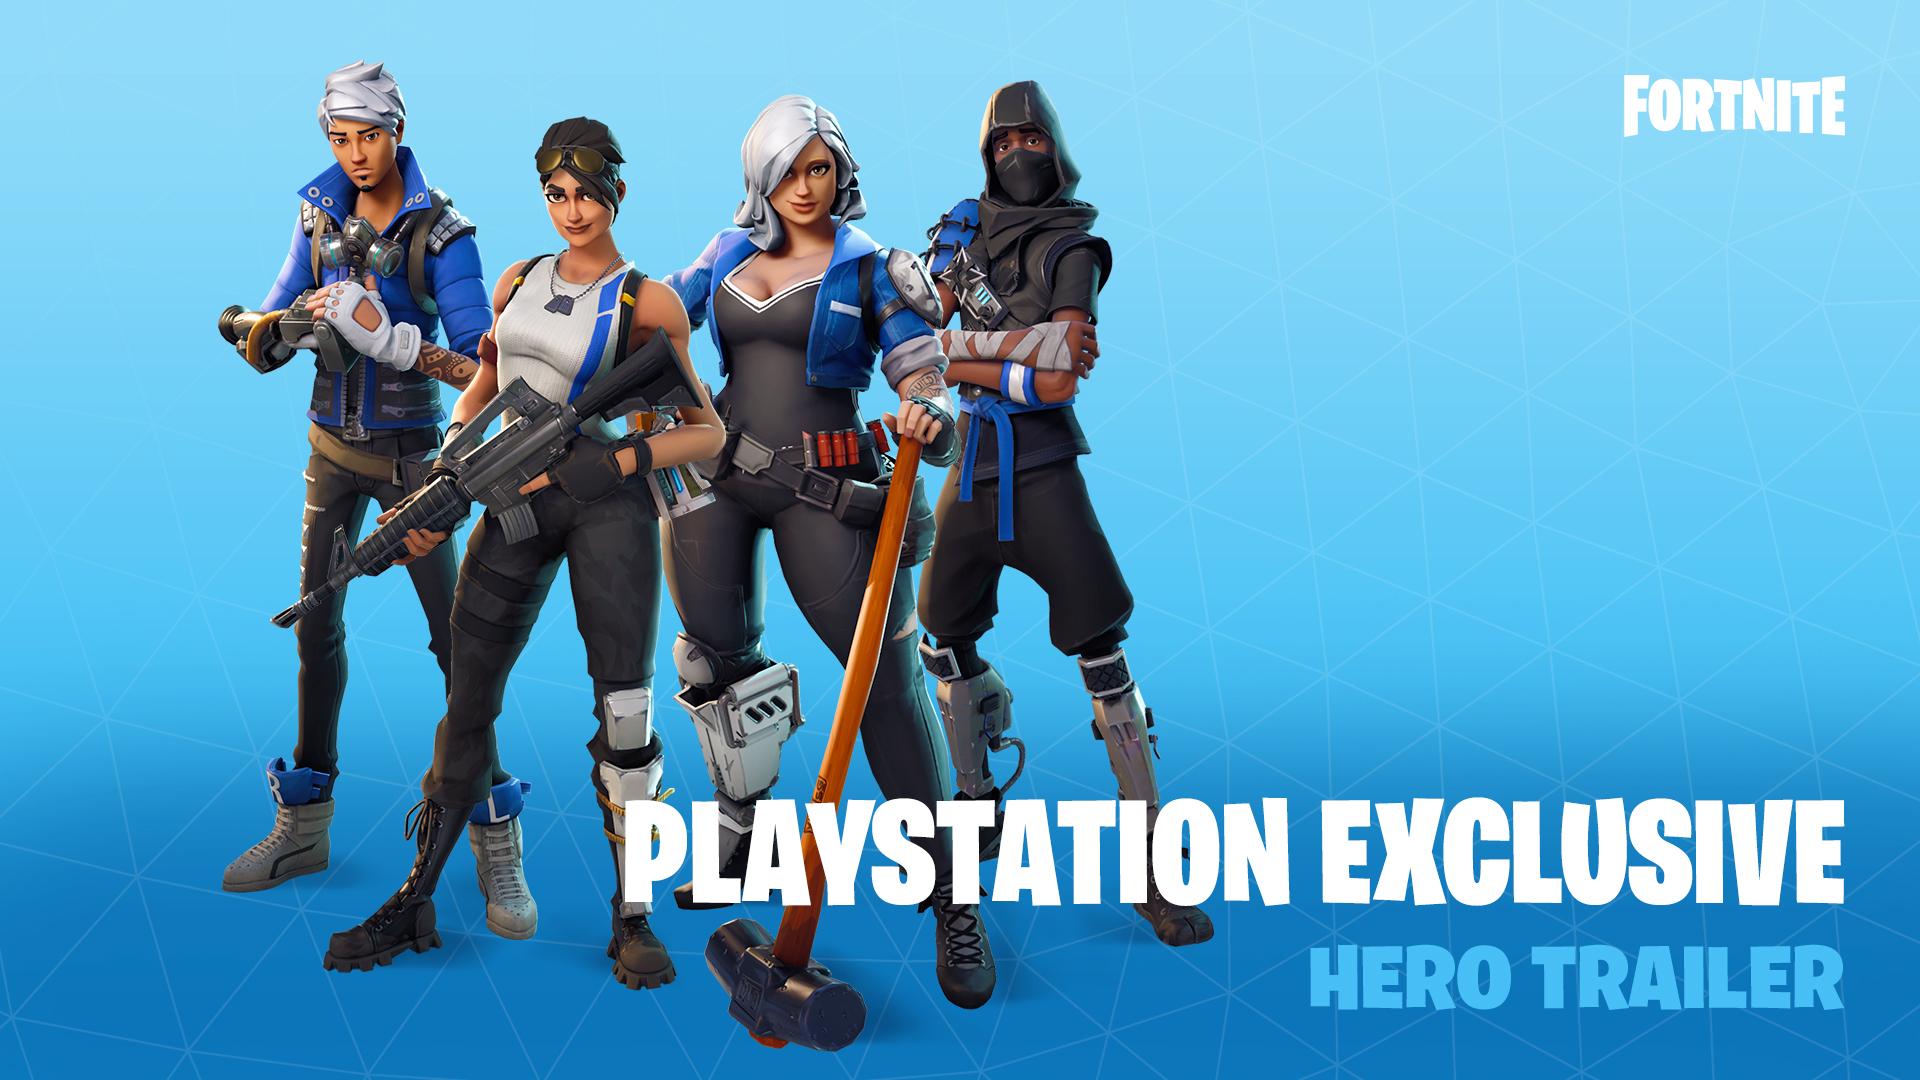 Fortnite Is Here With Exclusive PS4 Heroes